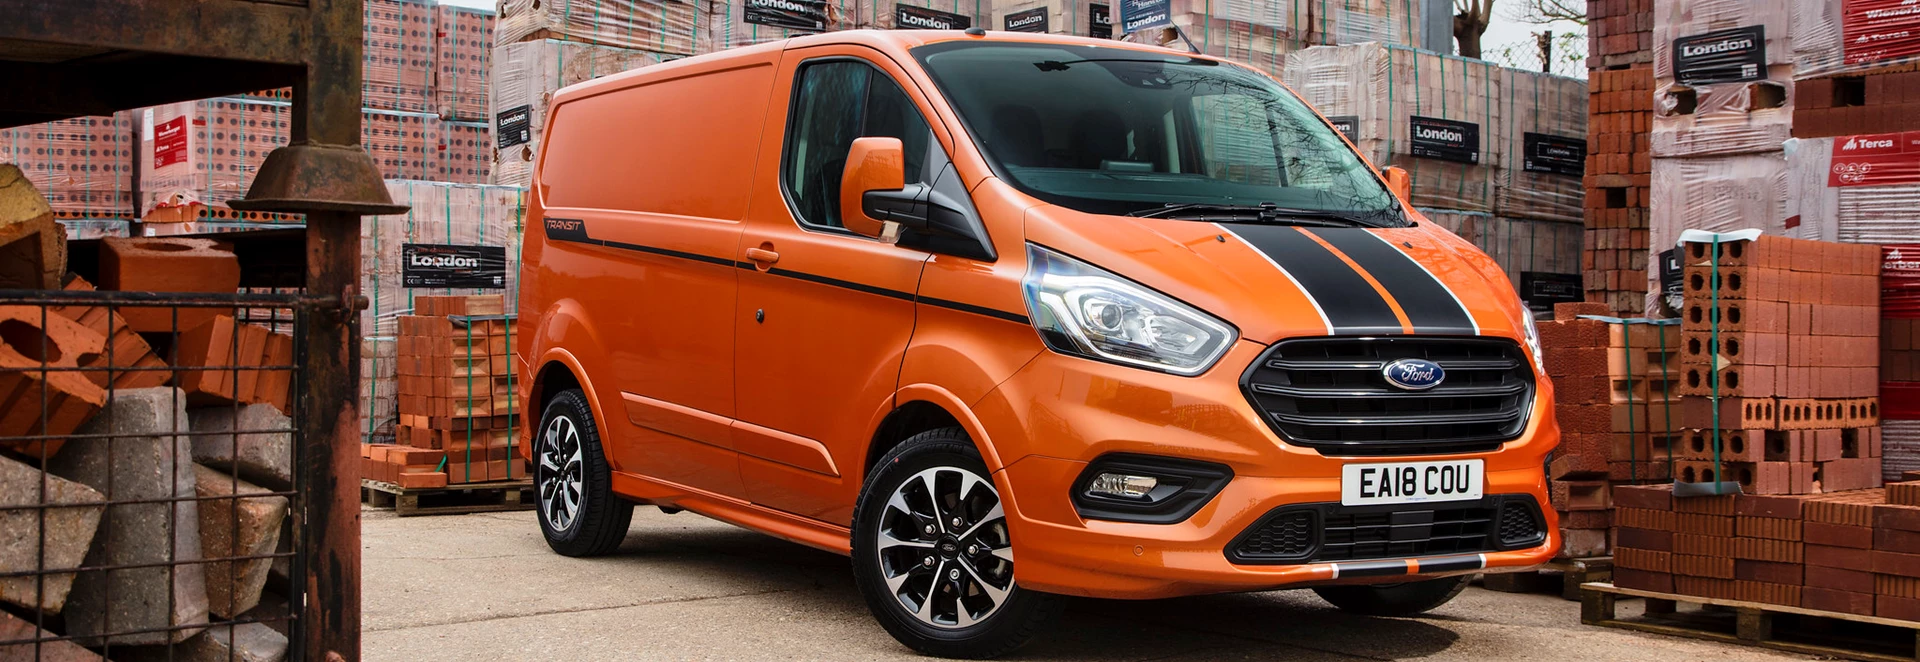 Ford Transit Custom proves to be best-seller again in April 